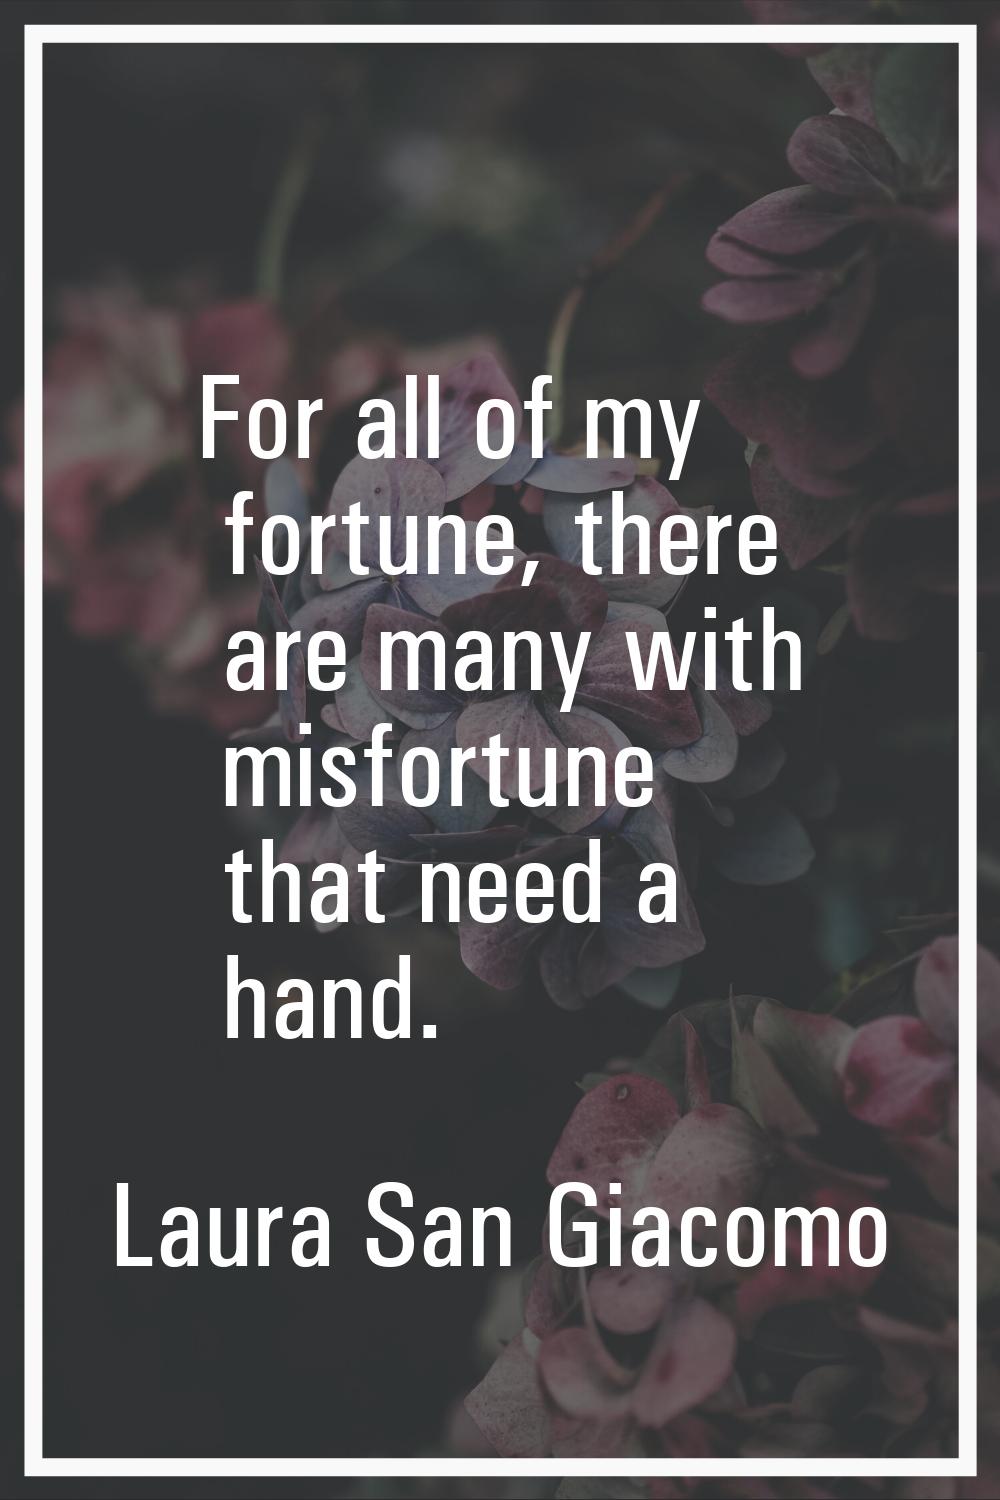 For all of my fortune, there are many with misfortune that need a hand.